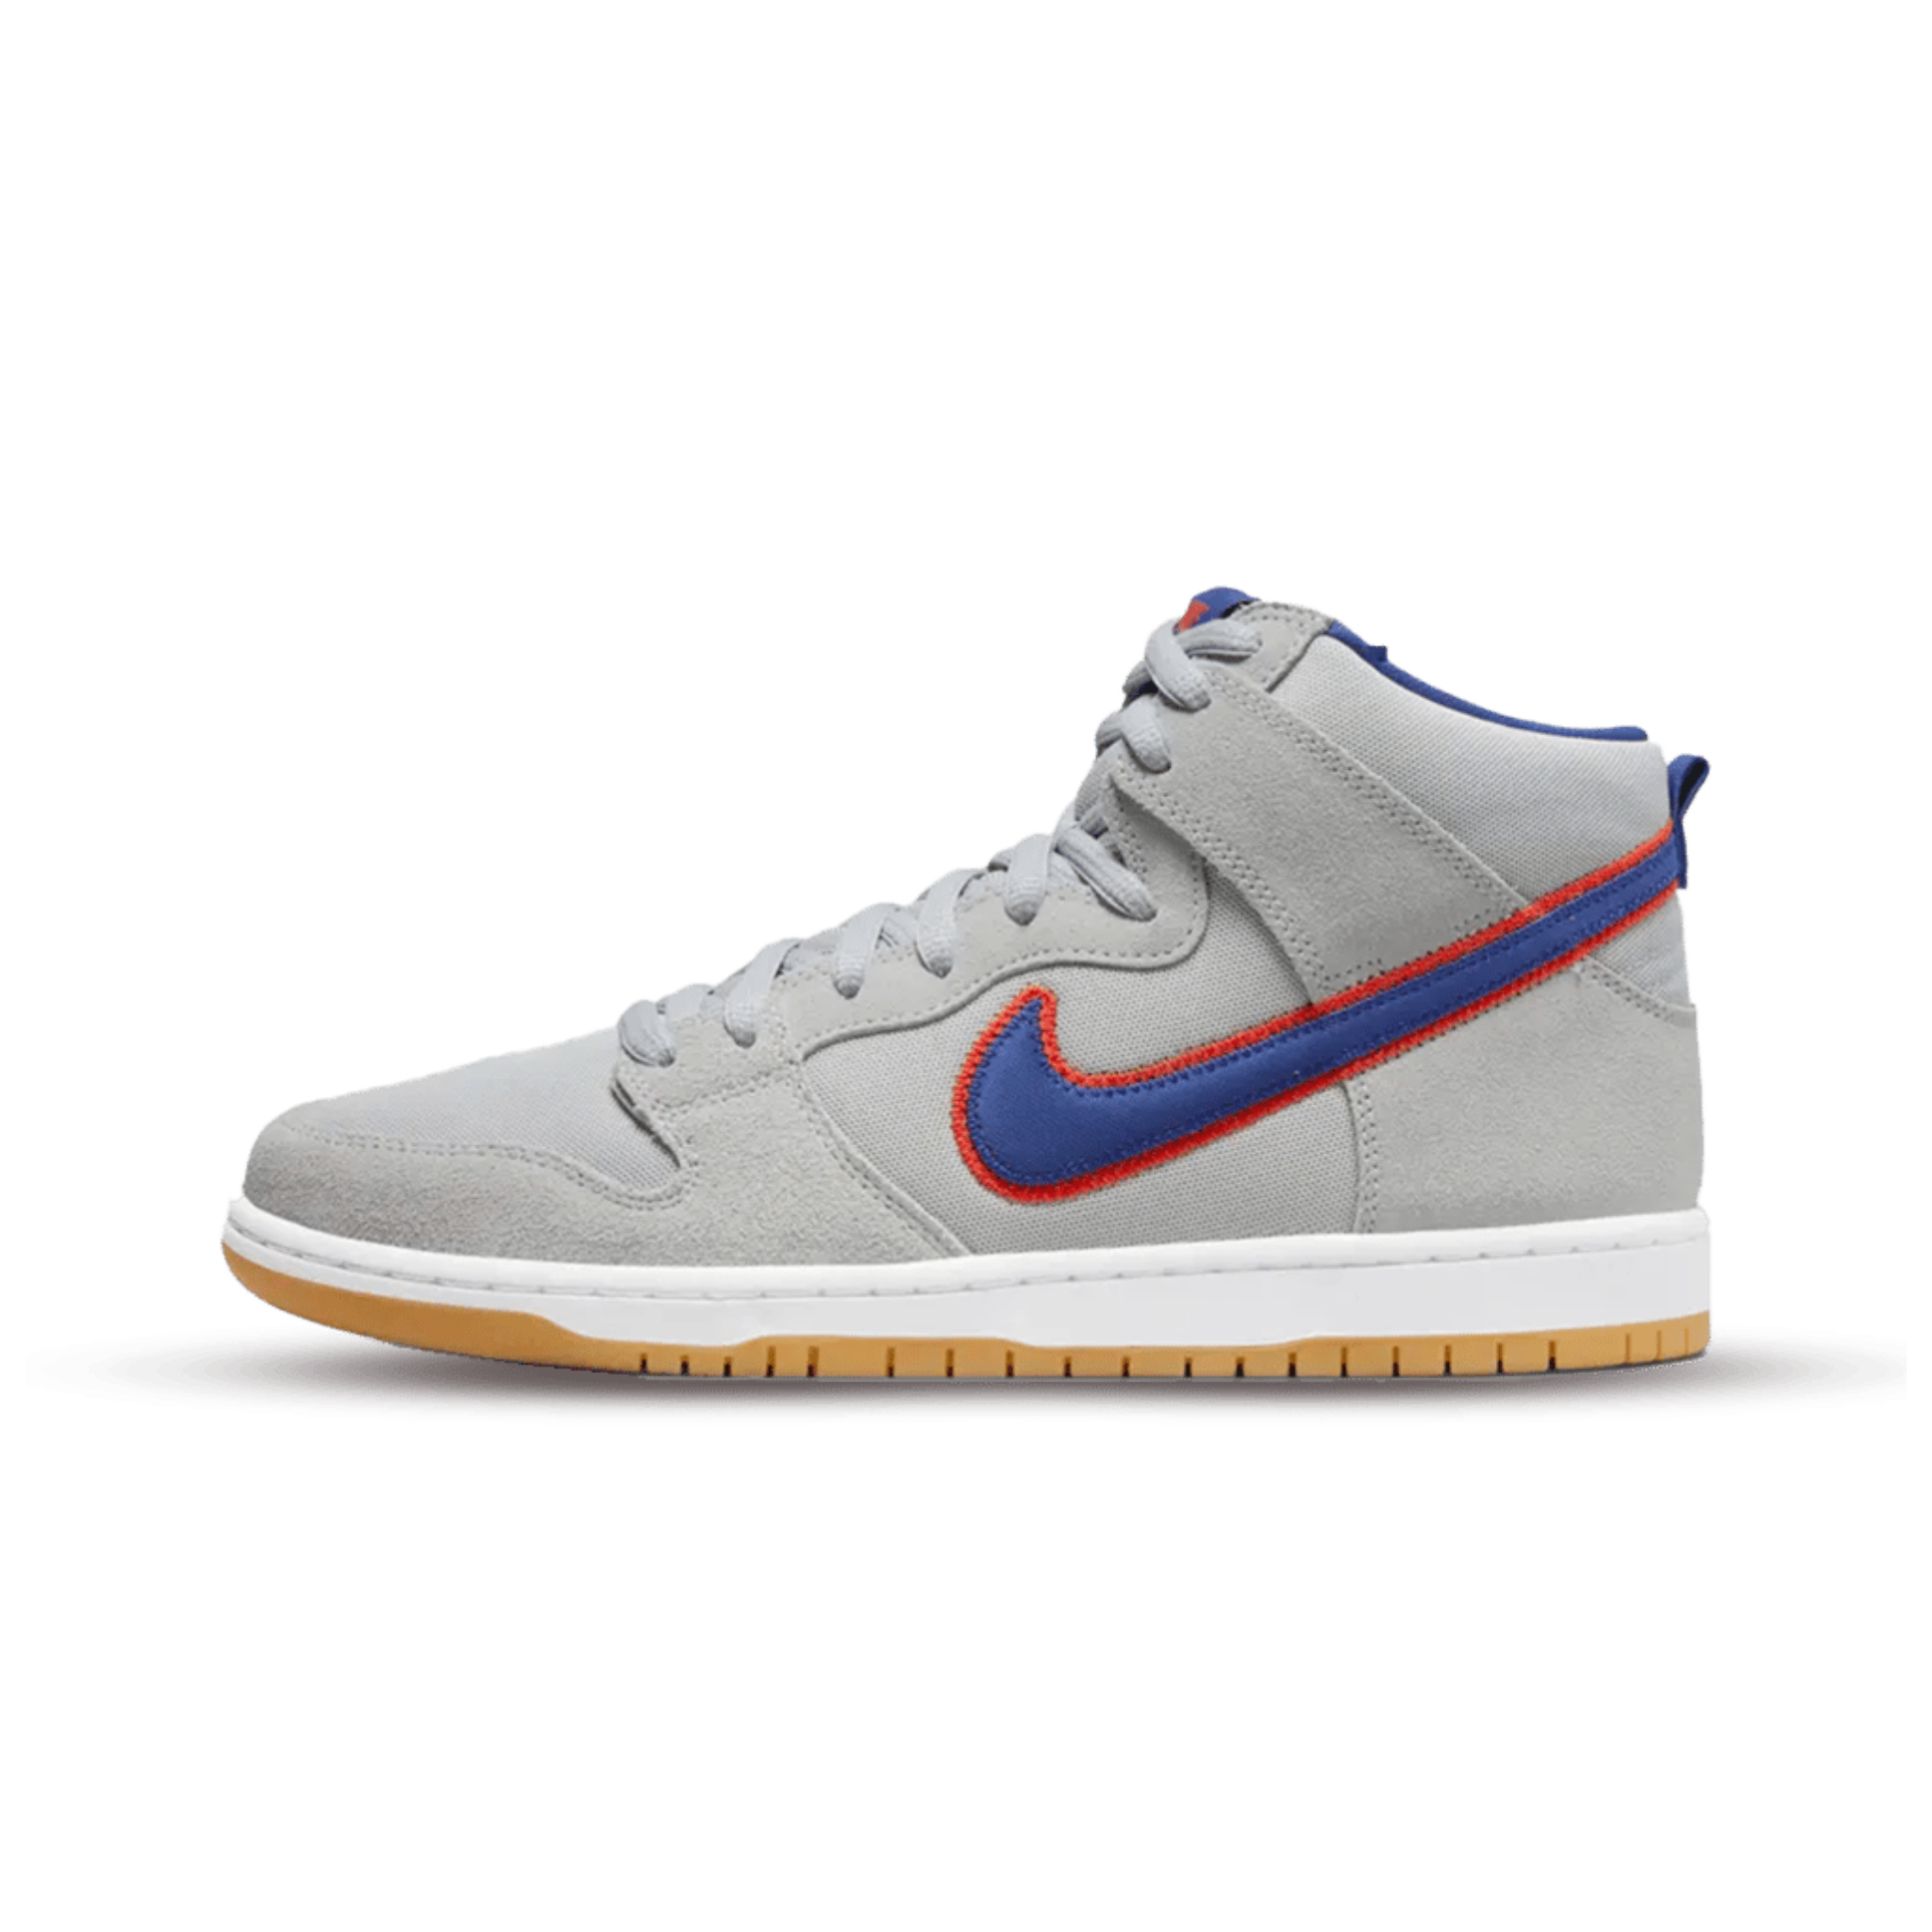 Nike SB Dunk High New York Mets  DH7155-001  Hype Temple